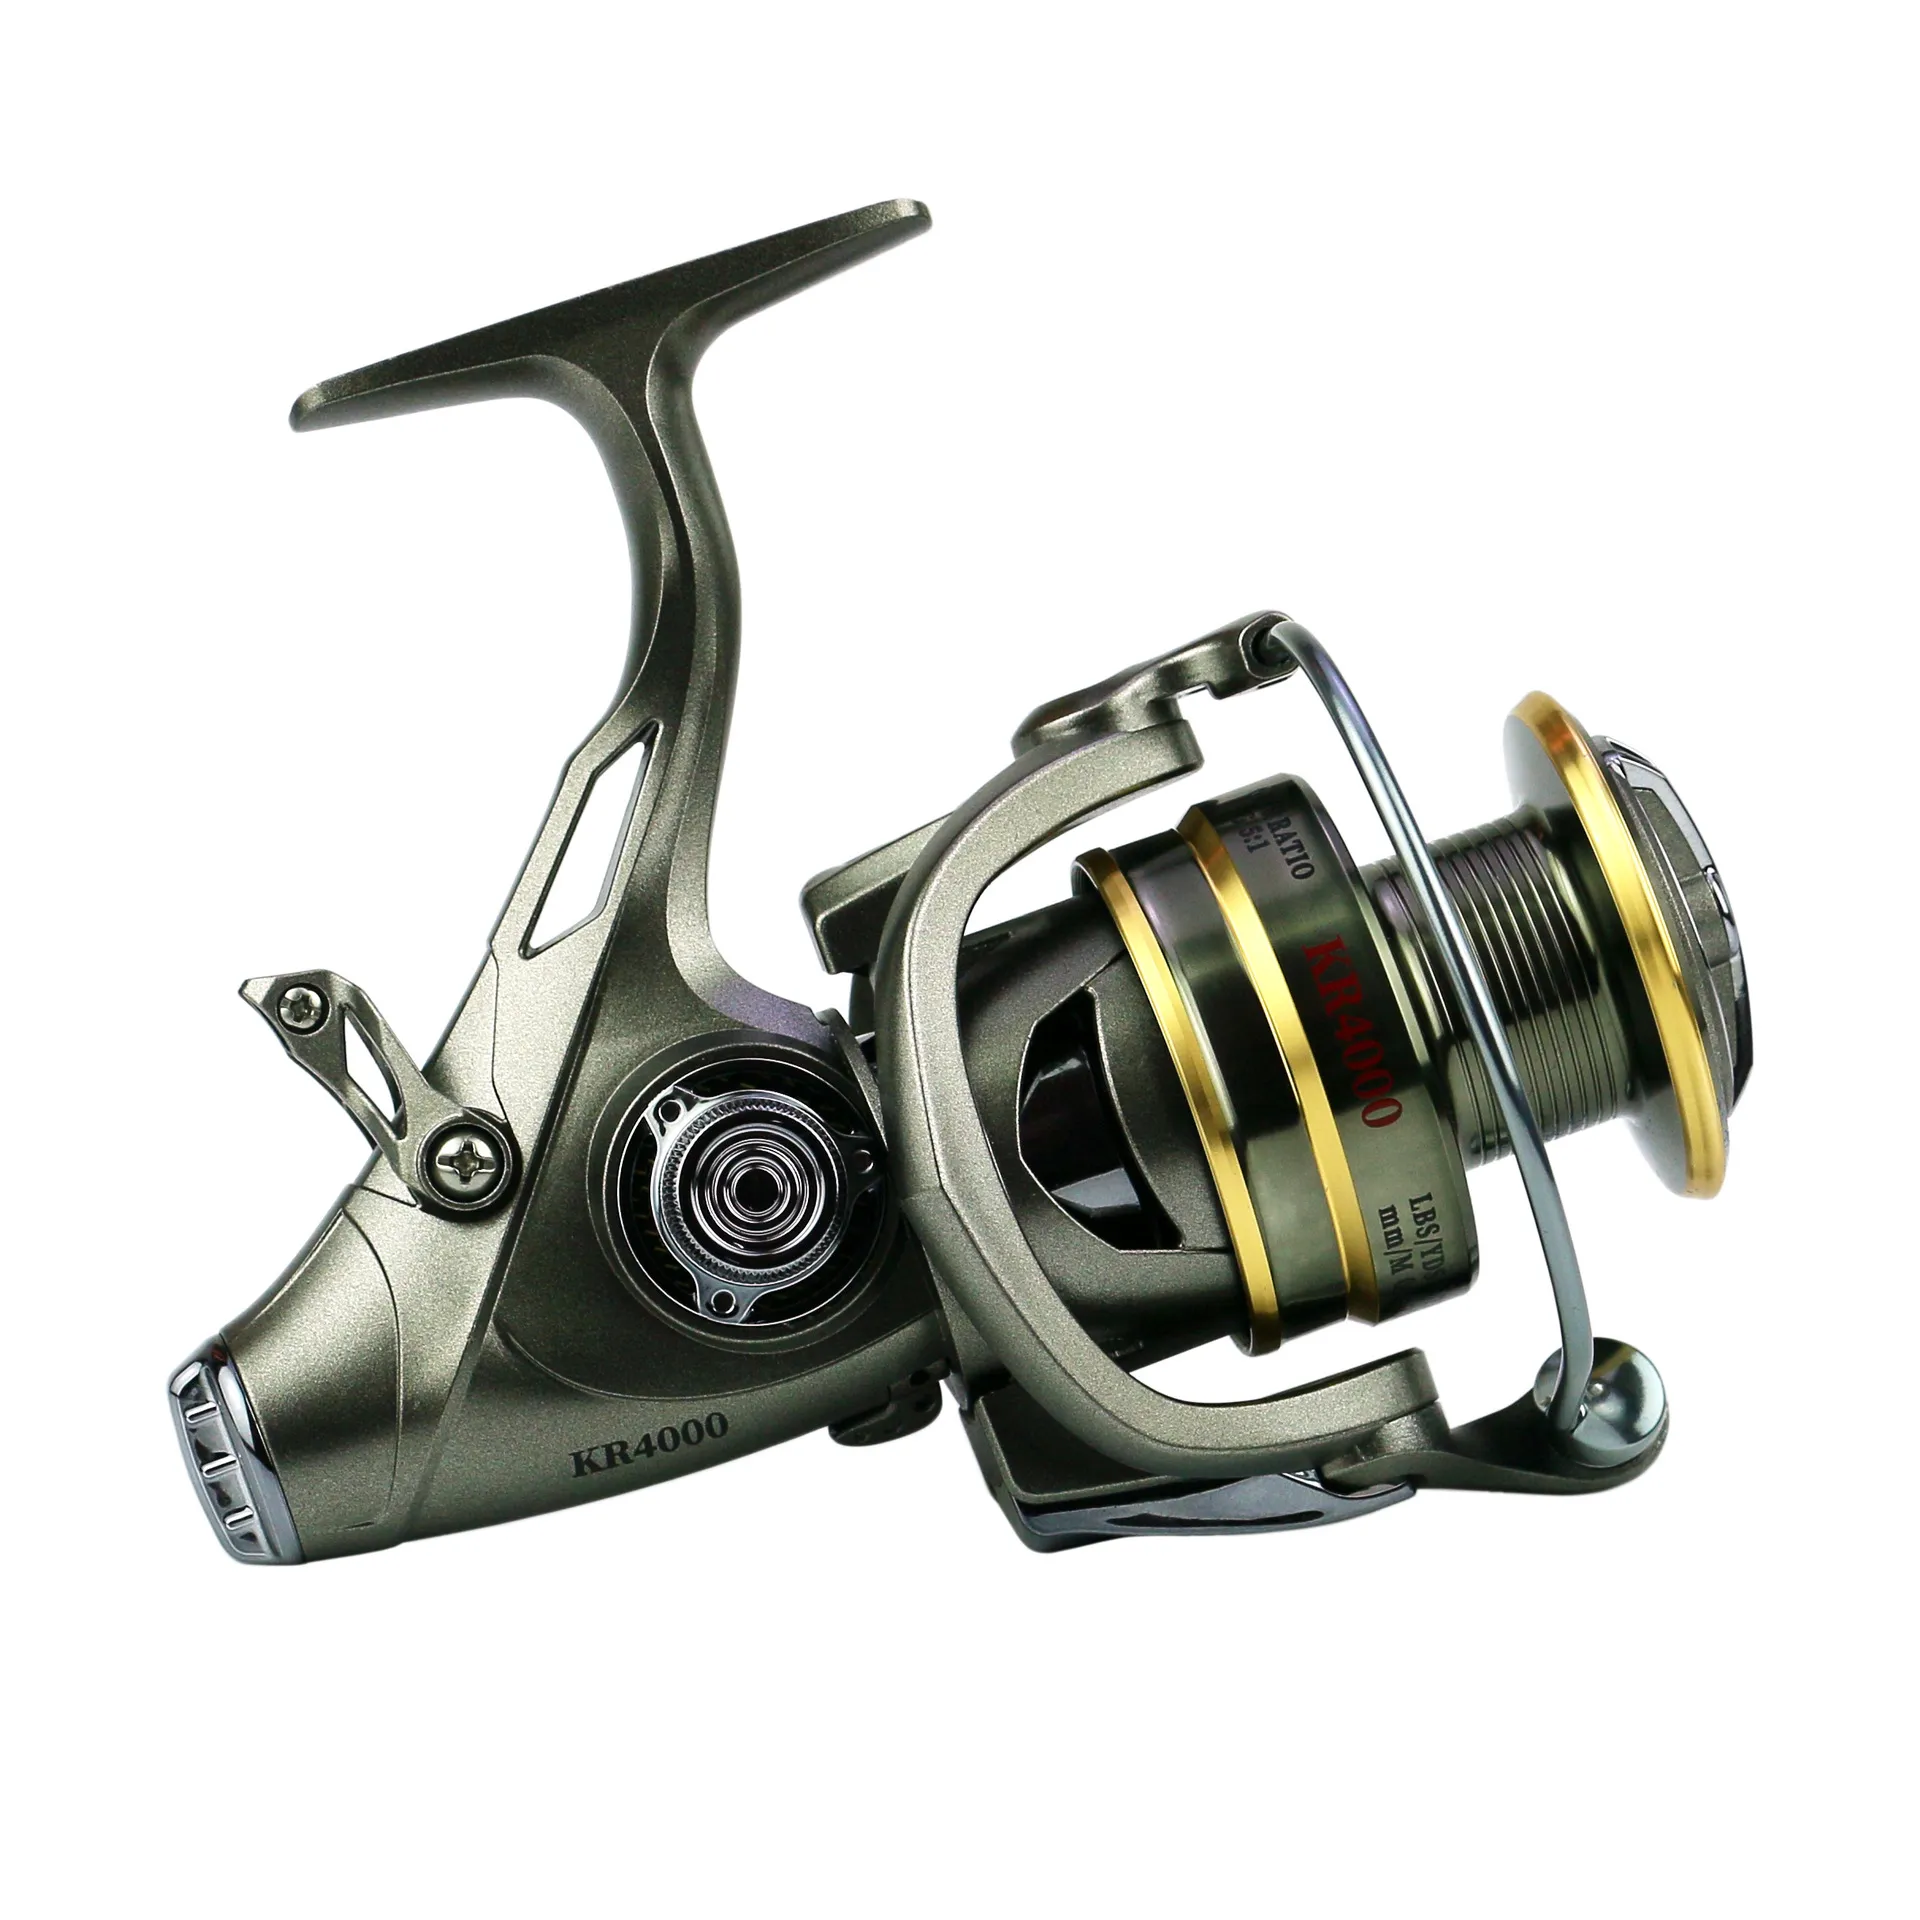 WOEN Library Double Discharge Fishing Top Rated Spinning Reels